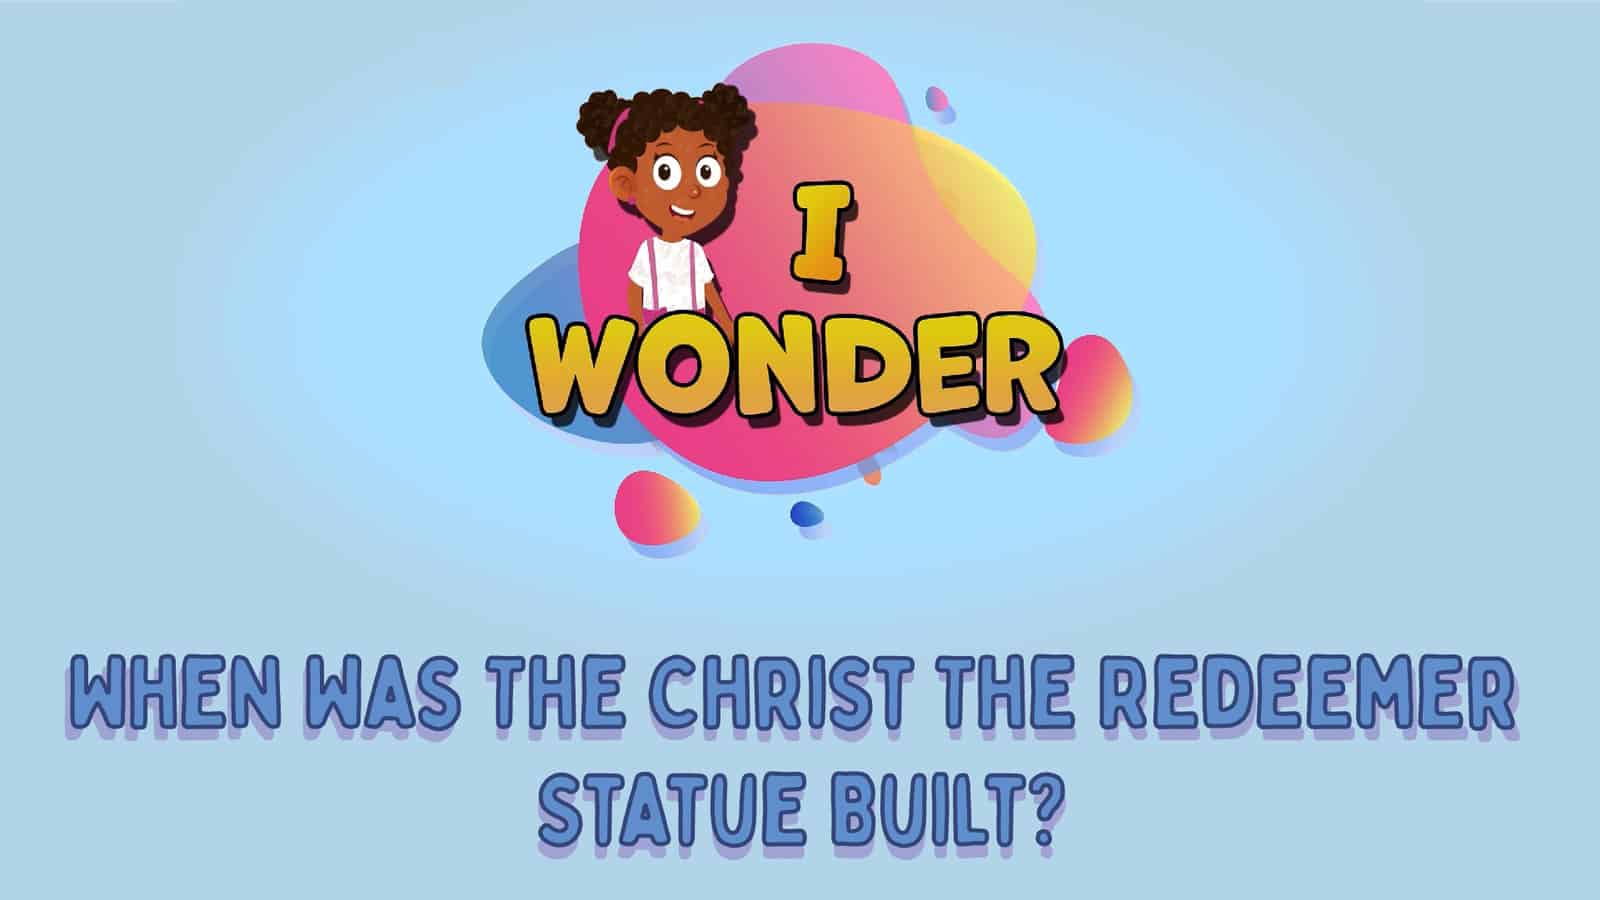 When Was The Christ The Redeemer Statue Built?